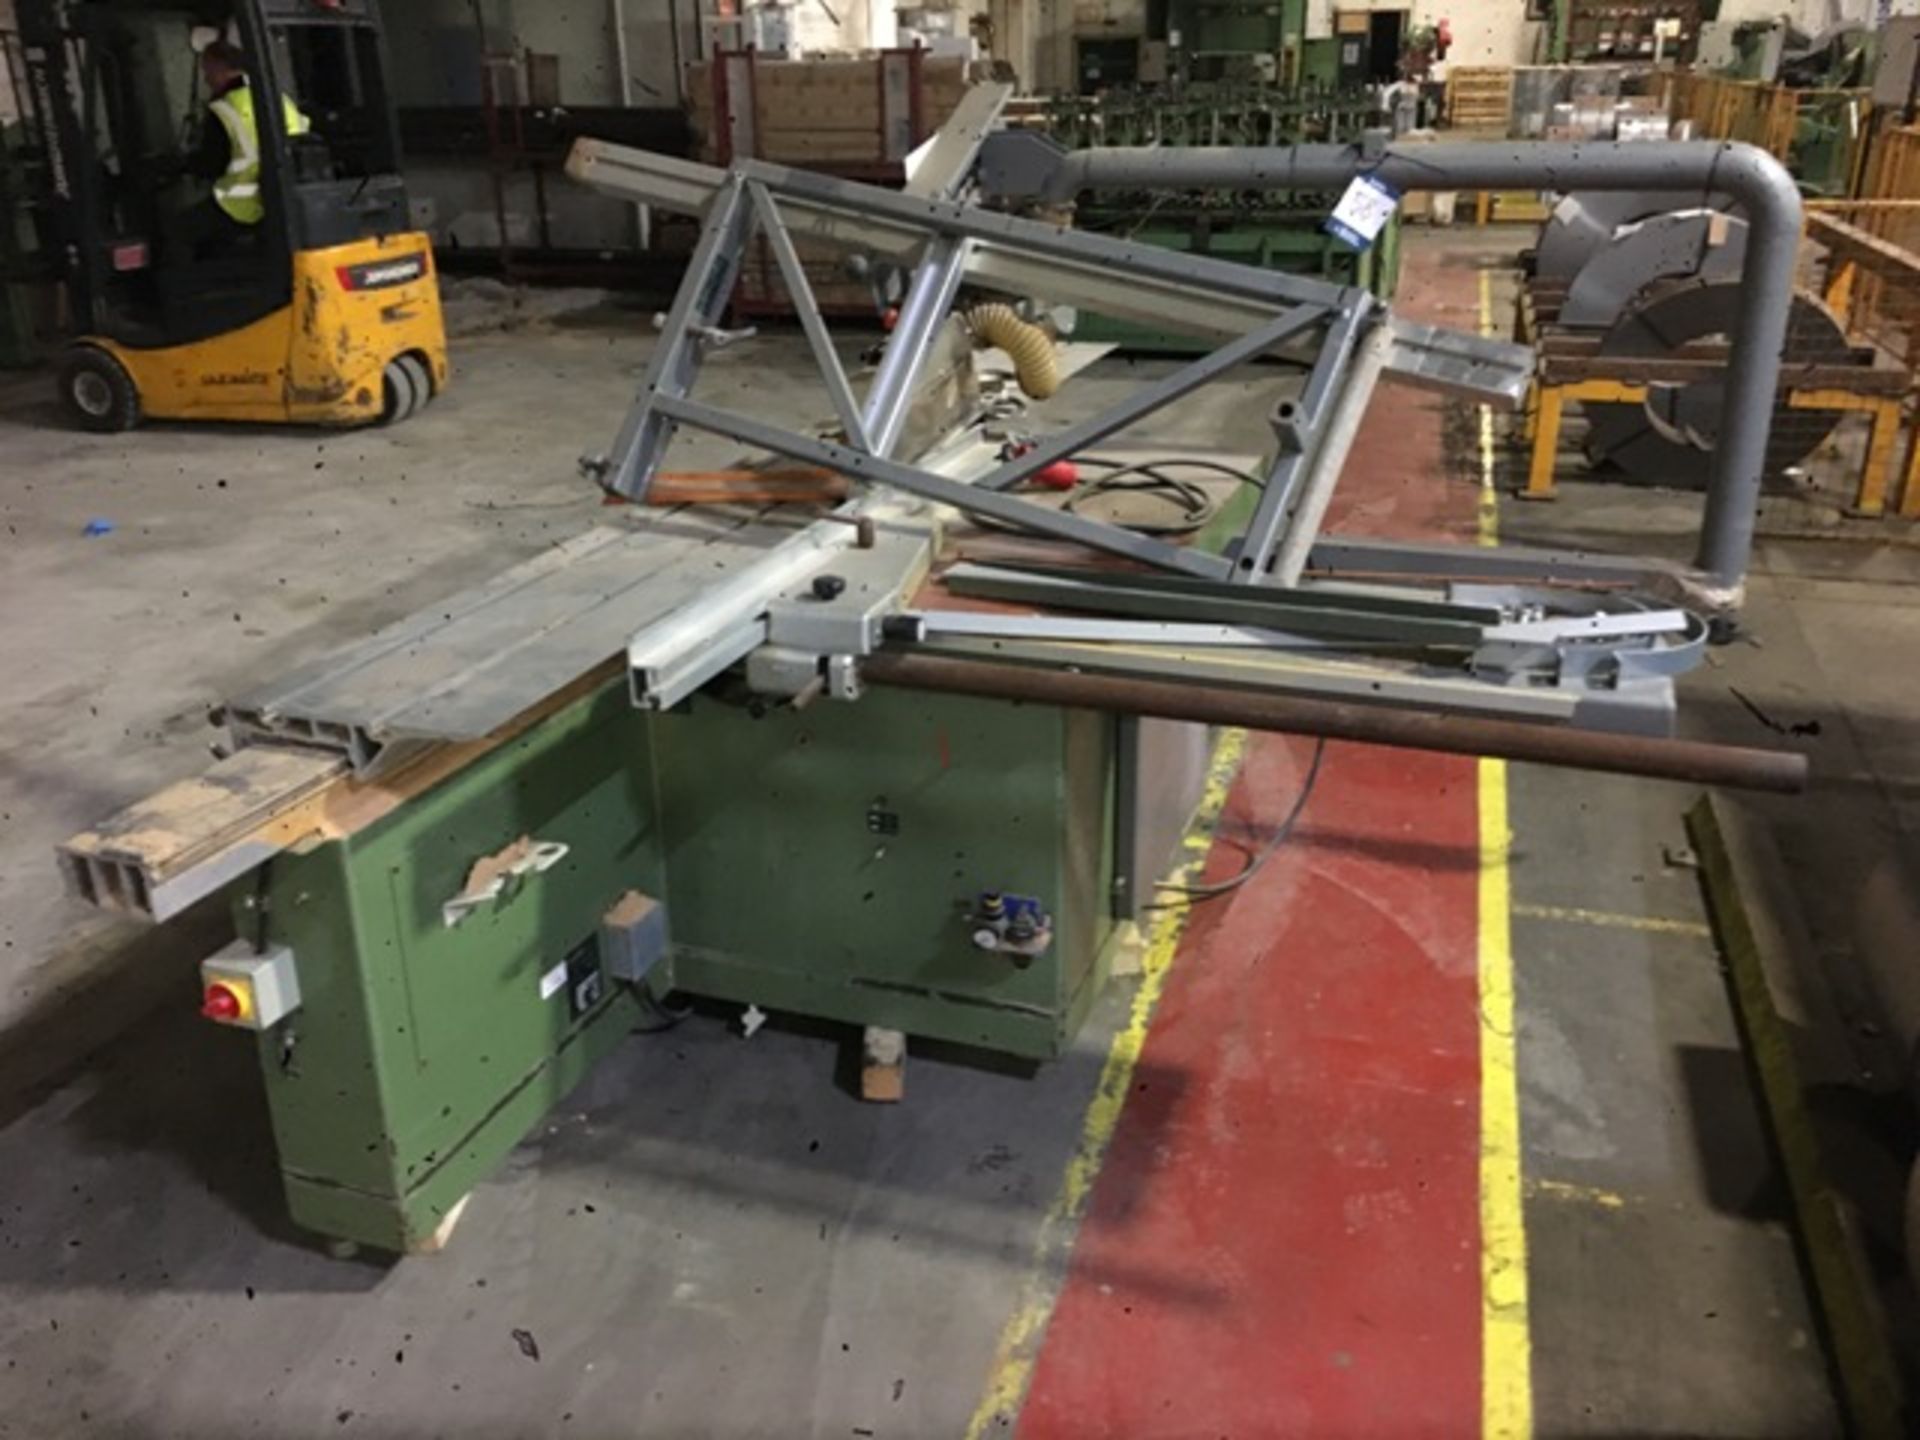 Casolin Astra 3200 PF panel saw, Serial No. 10075 (not currently commissioned / in use - all faults)